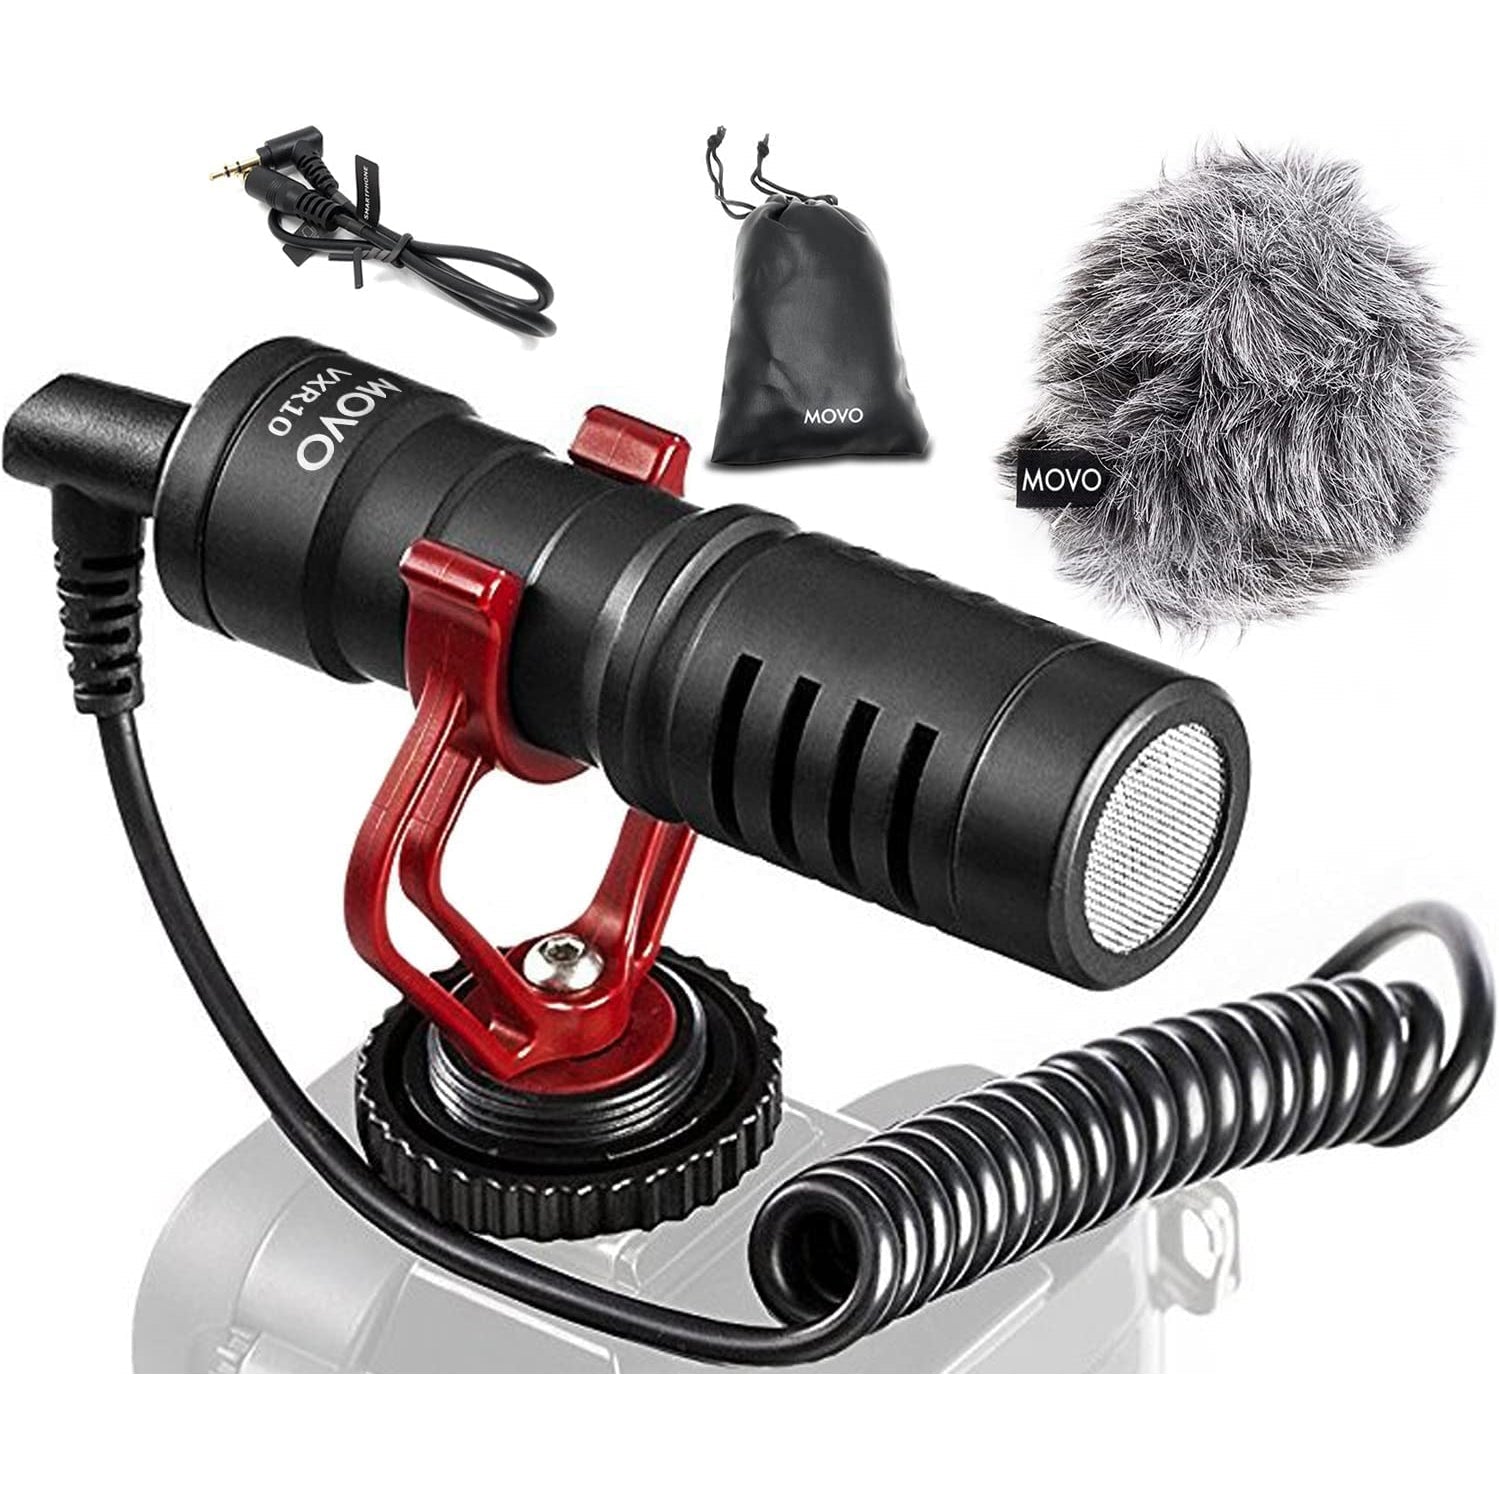 How To Use A Microphone With Video Camera ?